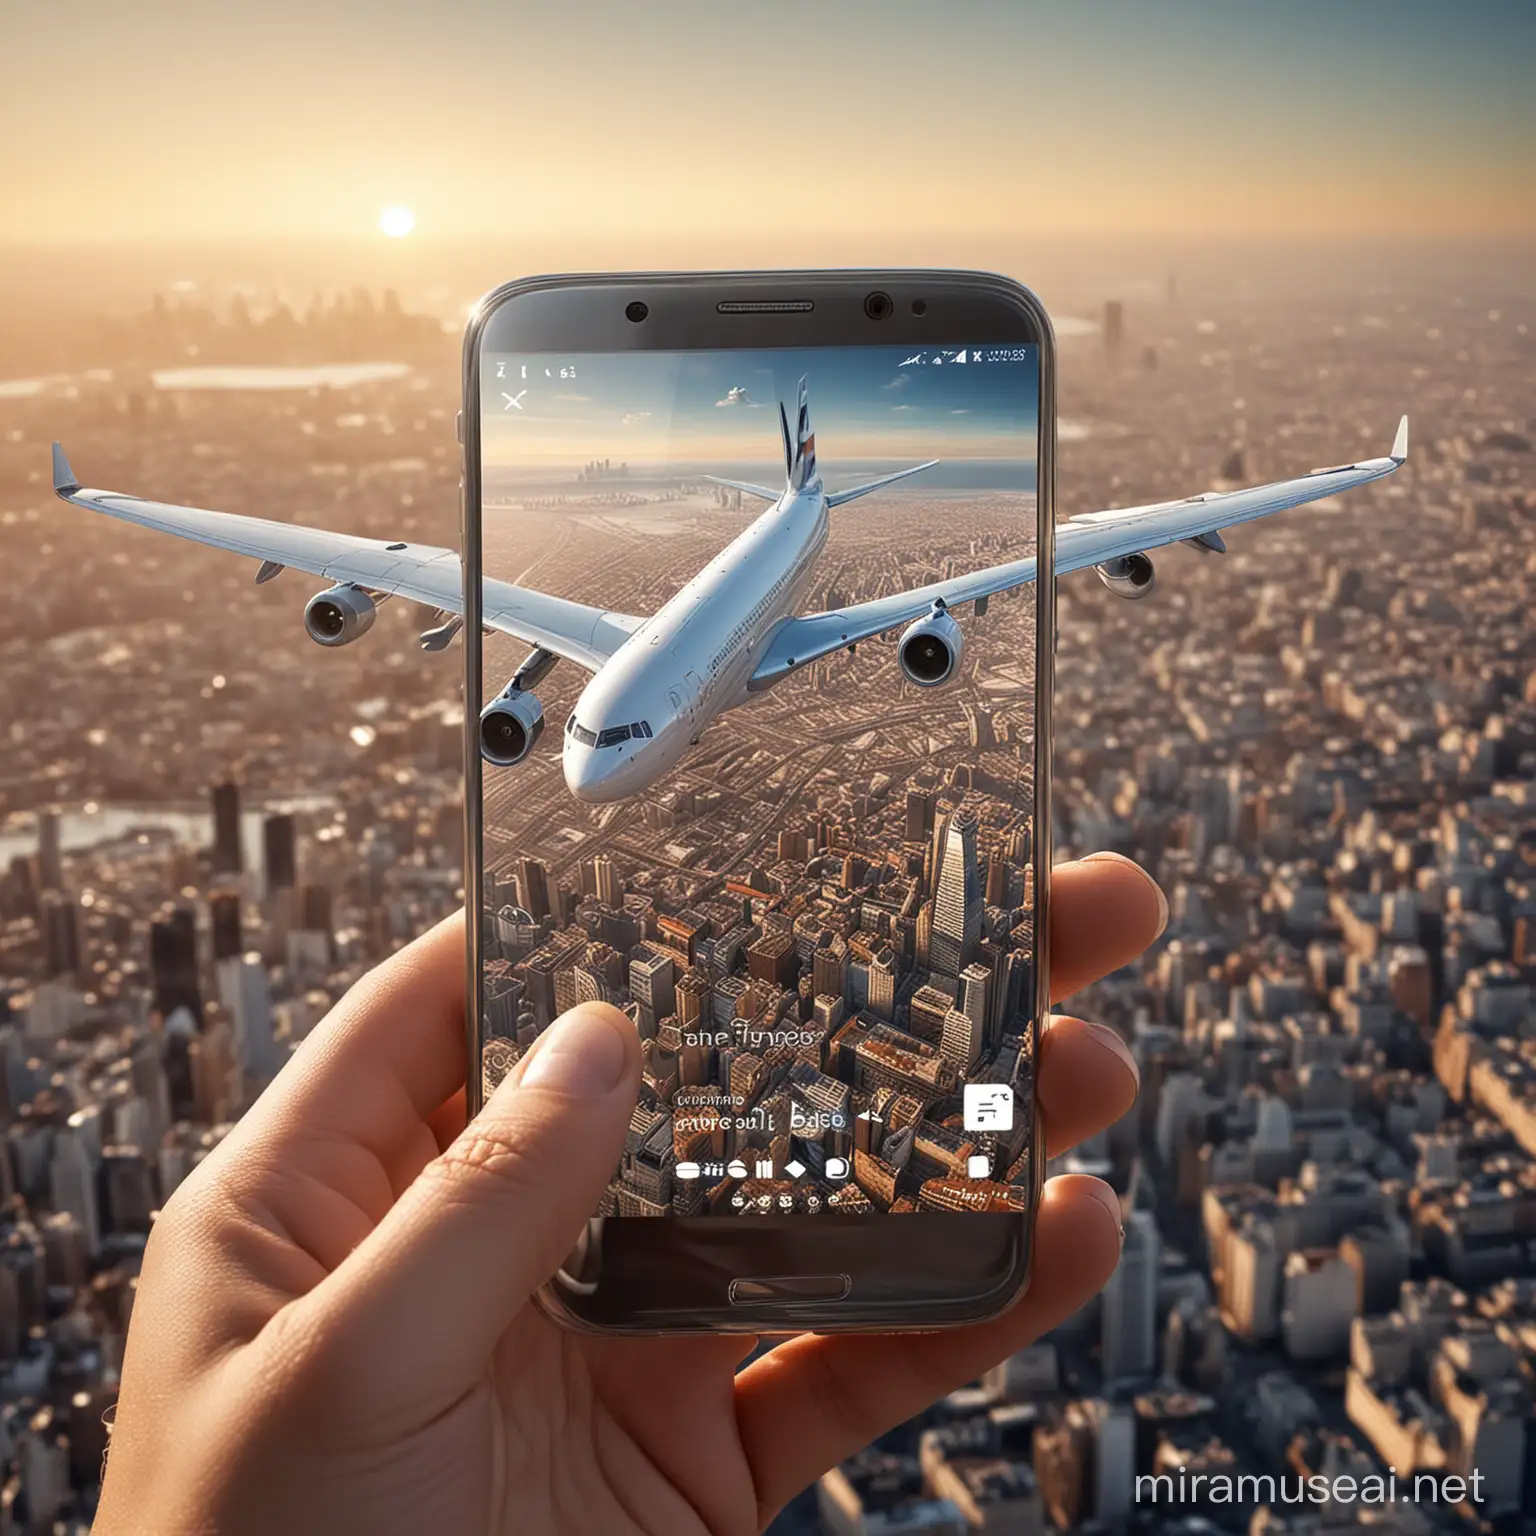 Futuristic Air France SmartphoneAirliner Fusion Over City Skyline